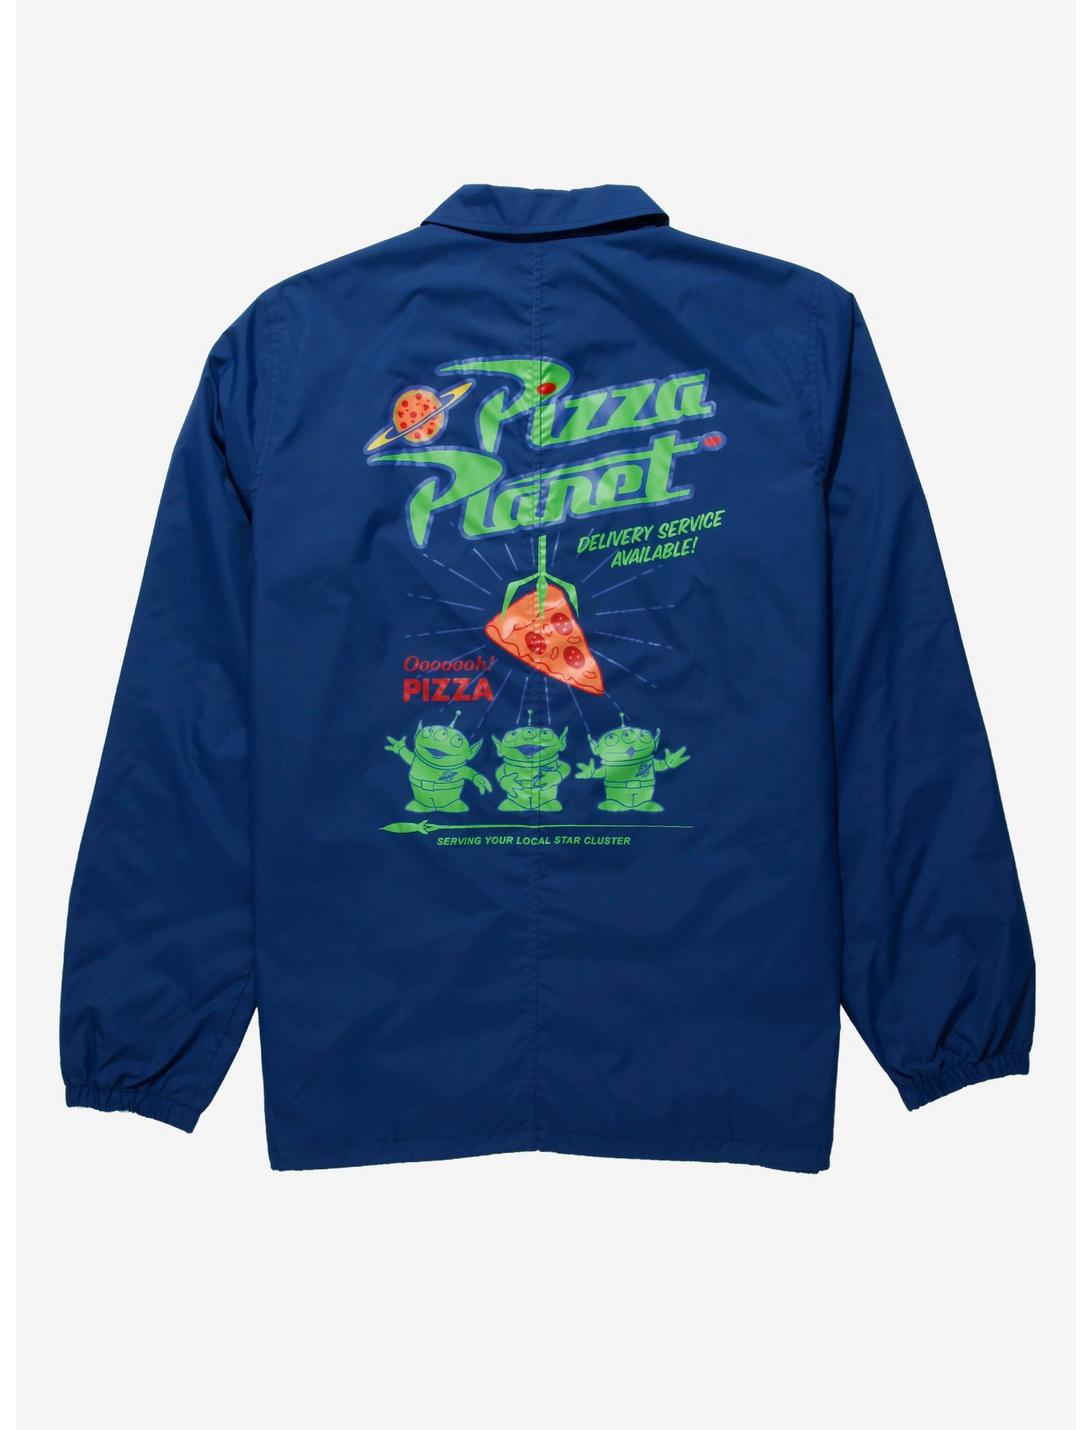 Disney Pixar Toy Story Pizza Planet Coach's Jacket - BoxLunch Exclusive, NAVY, hi-res